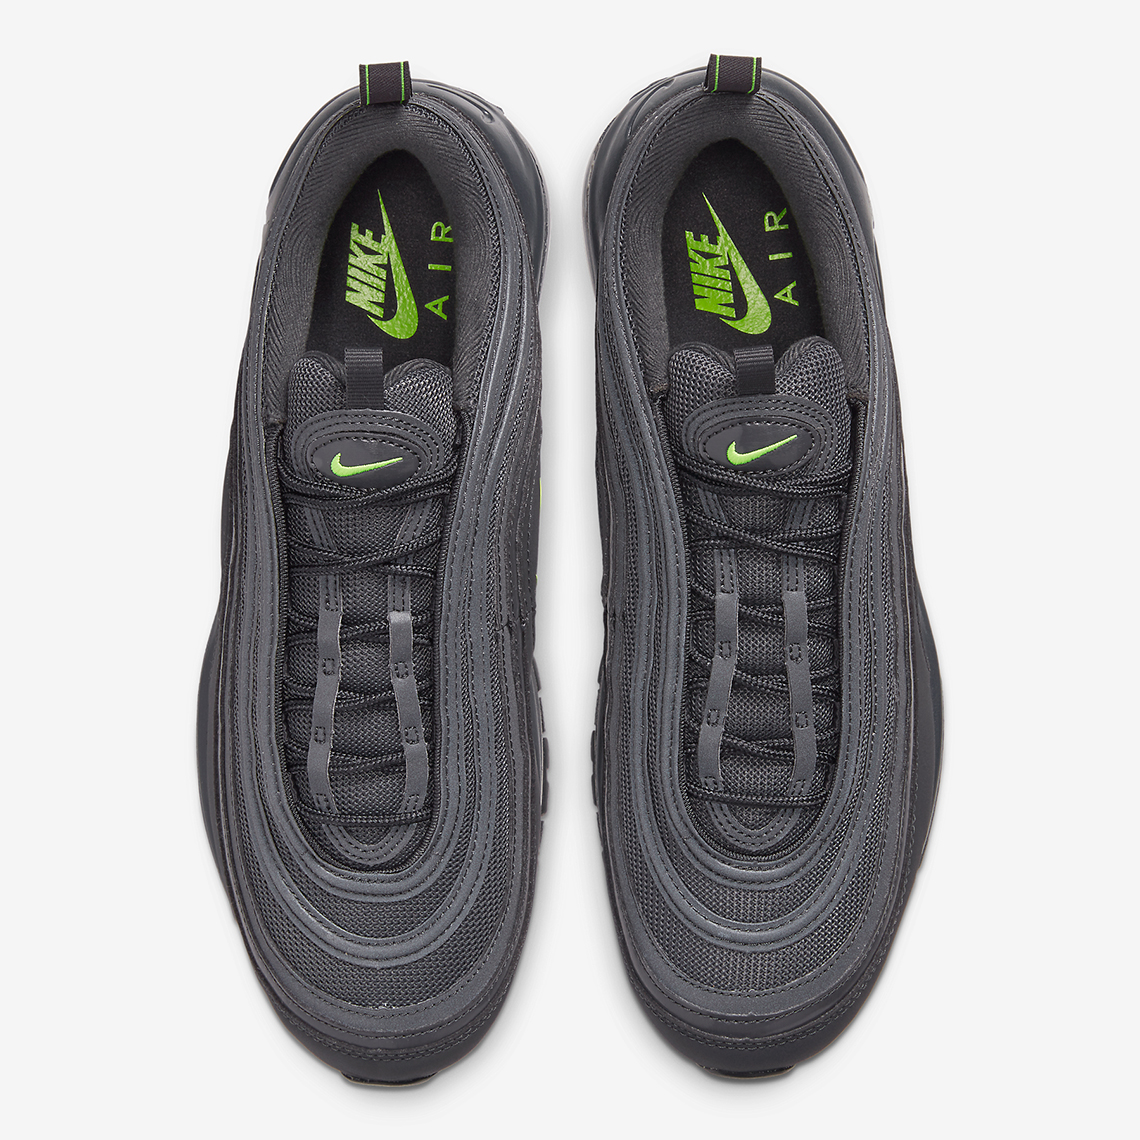 nike air max 97 just do it pack black